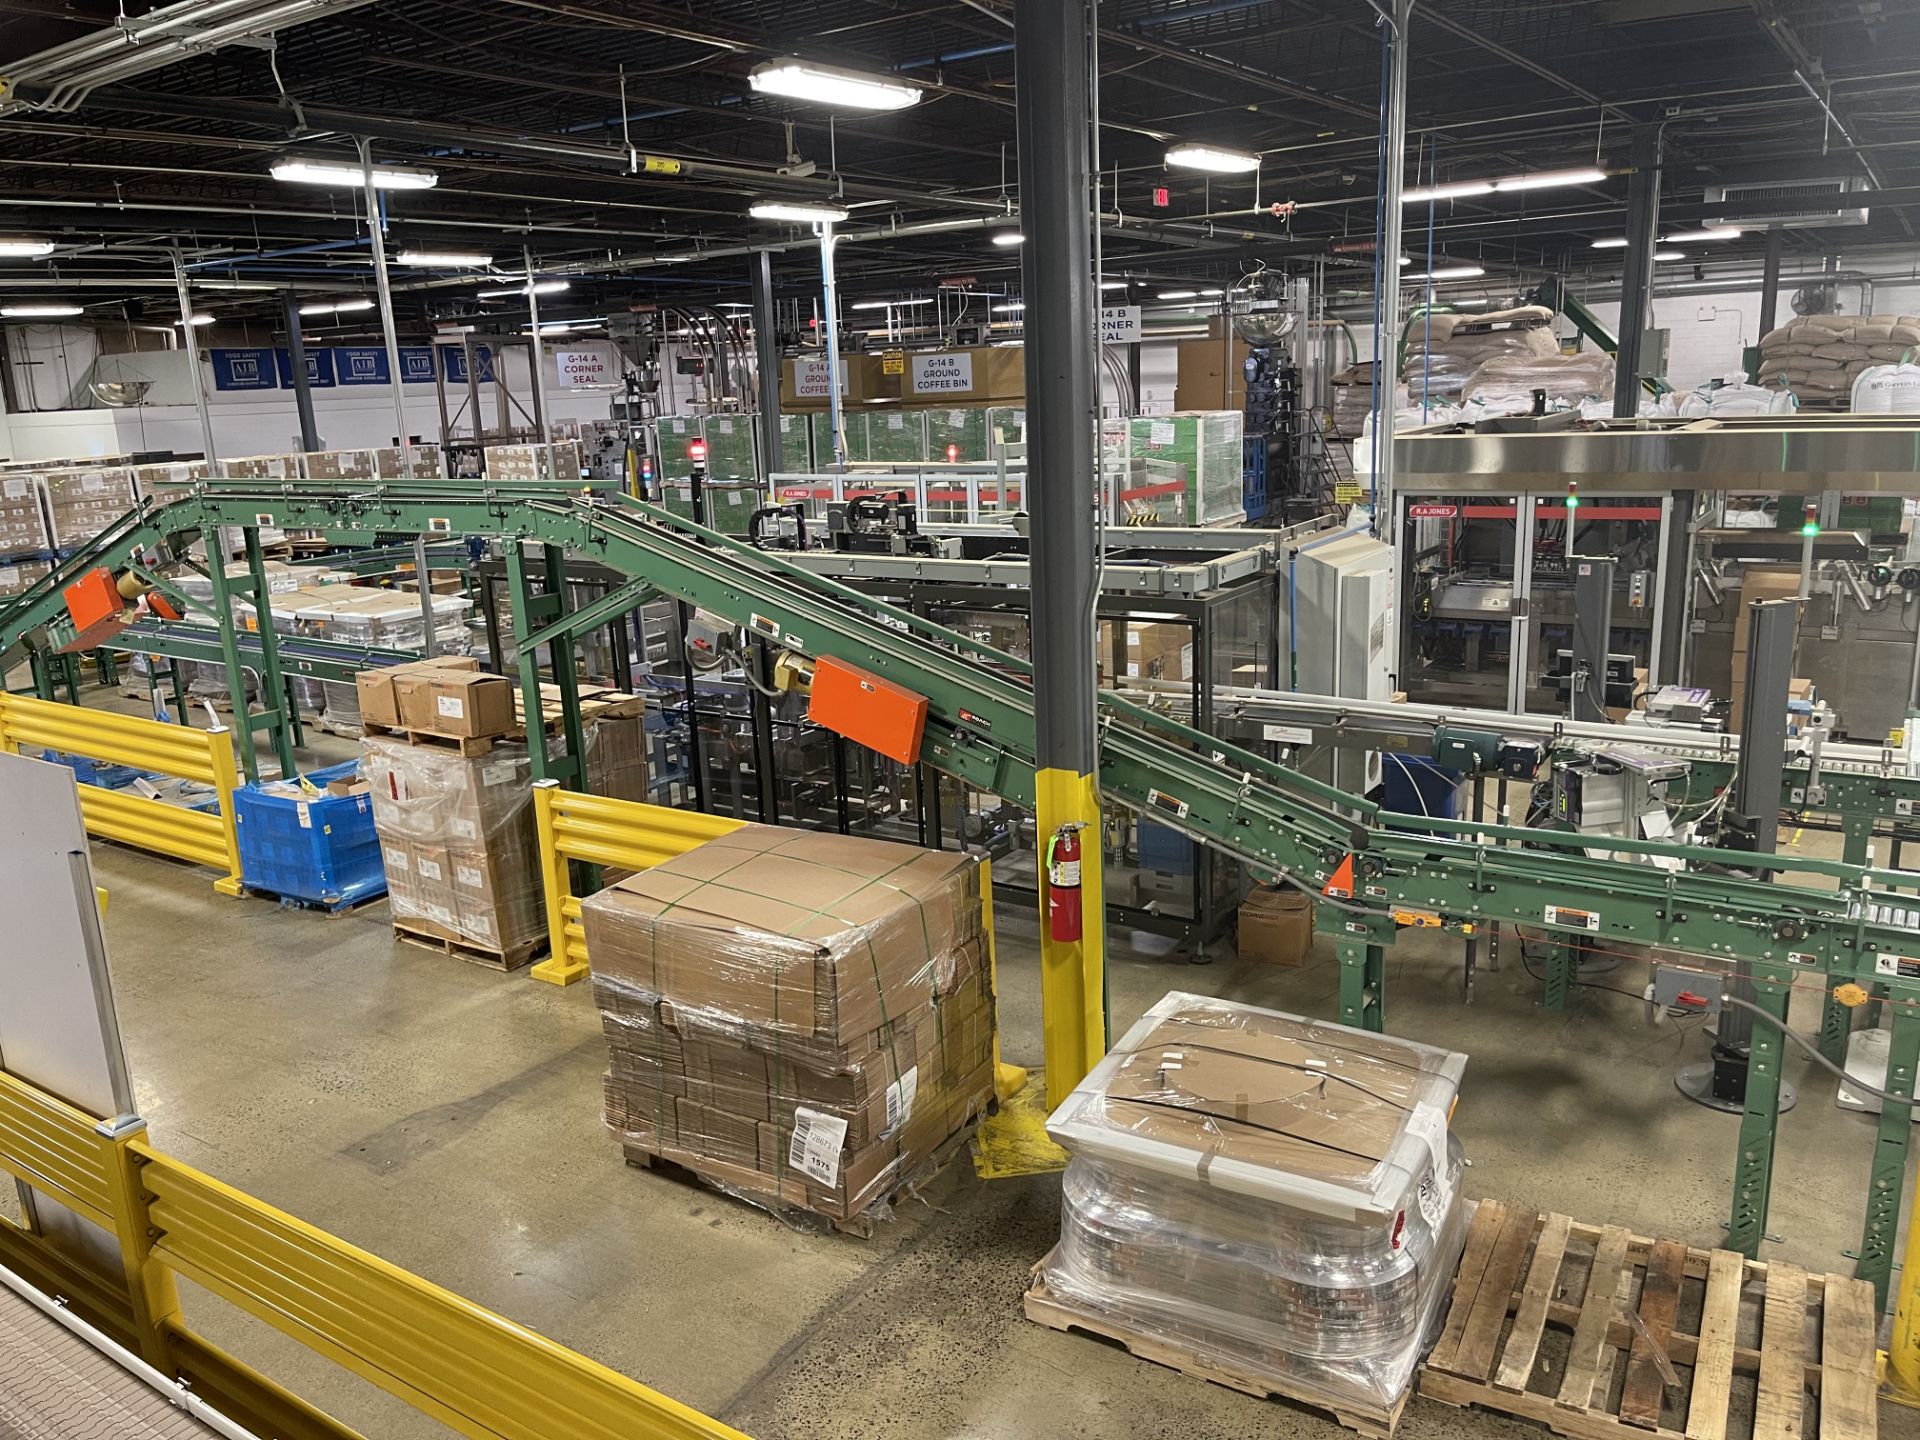 CASE CONVEYOR SYSTEMS ON PRODUCTION LINE (2019 MFG) - Image 3 of 3